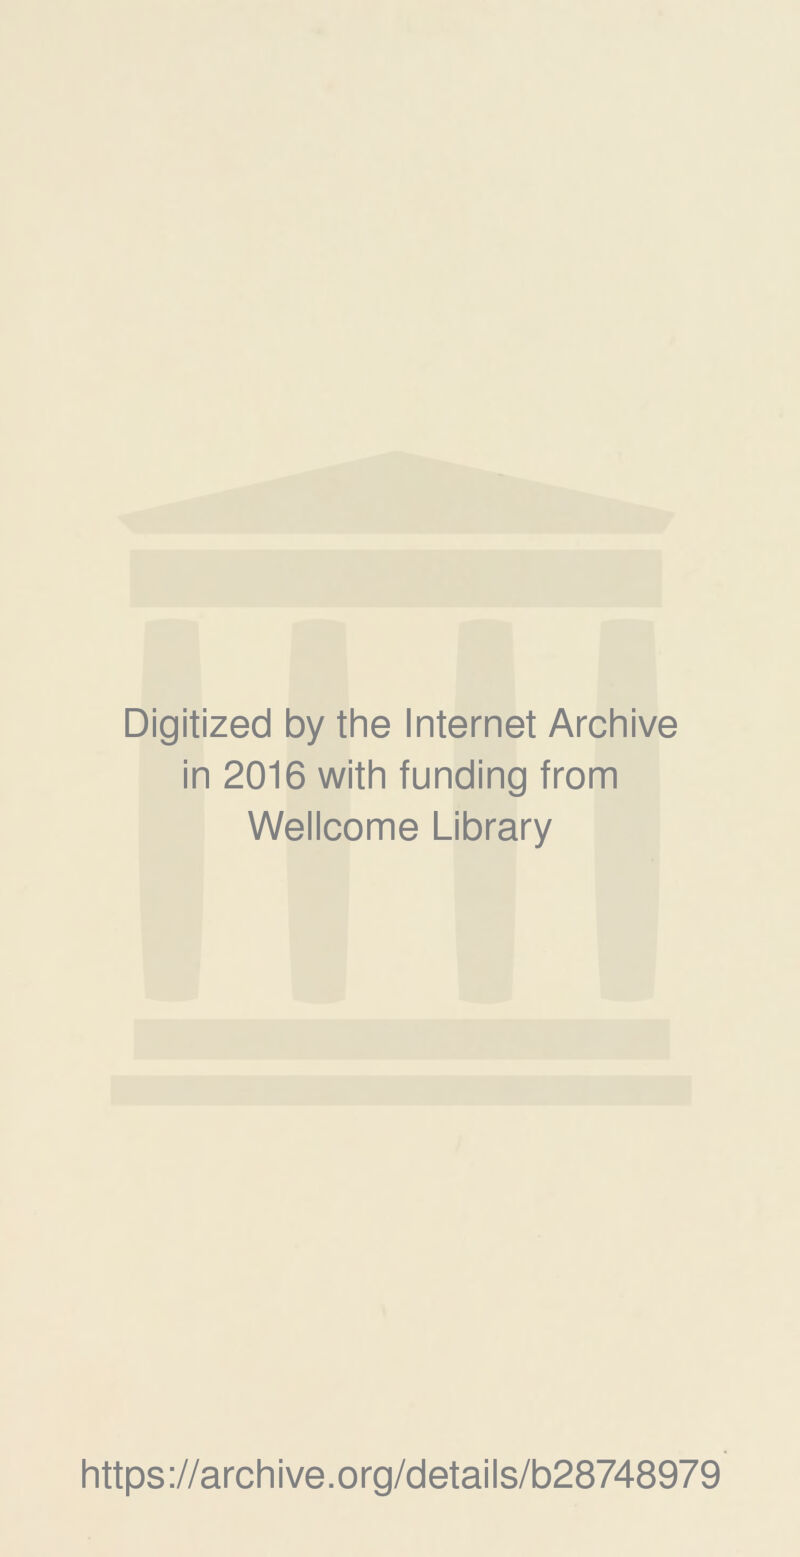 Digitized by the Internet Archive in 2016 with funding from Wellcome Library https://archive.org/details/b28748979